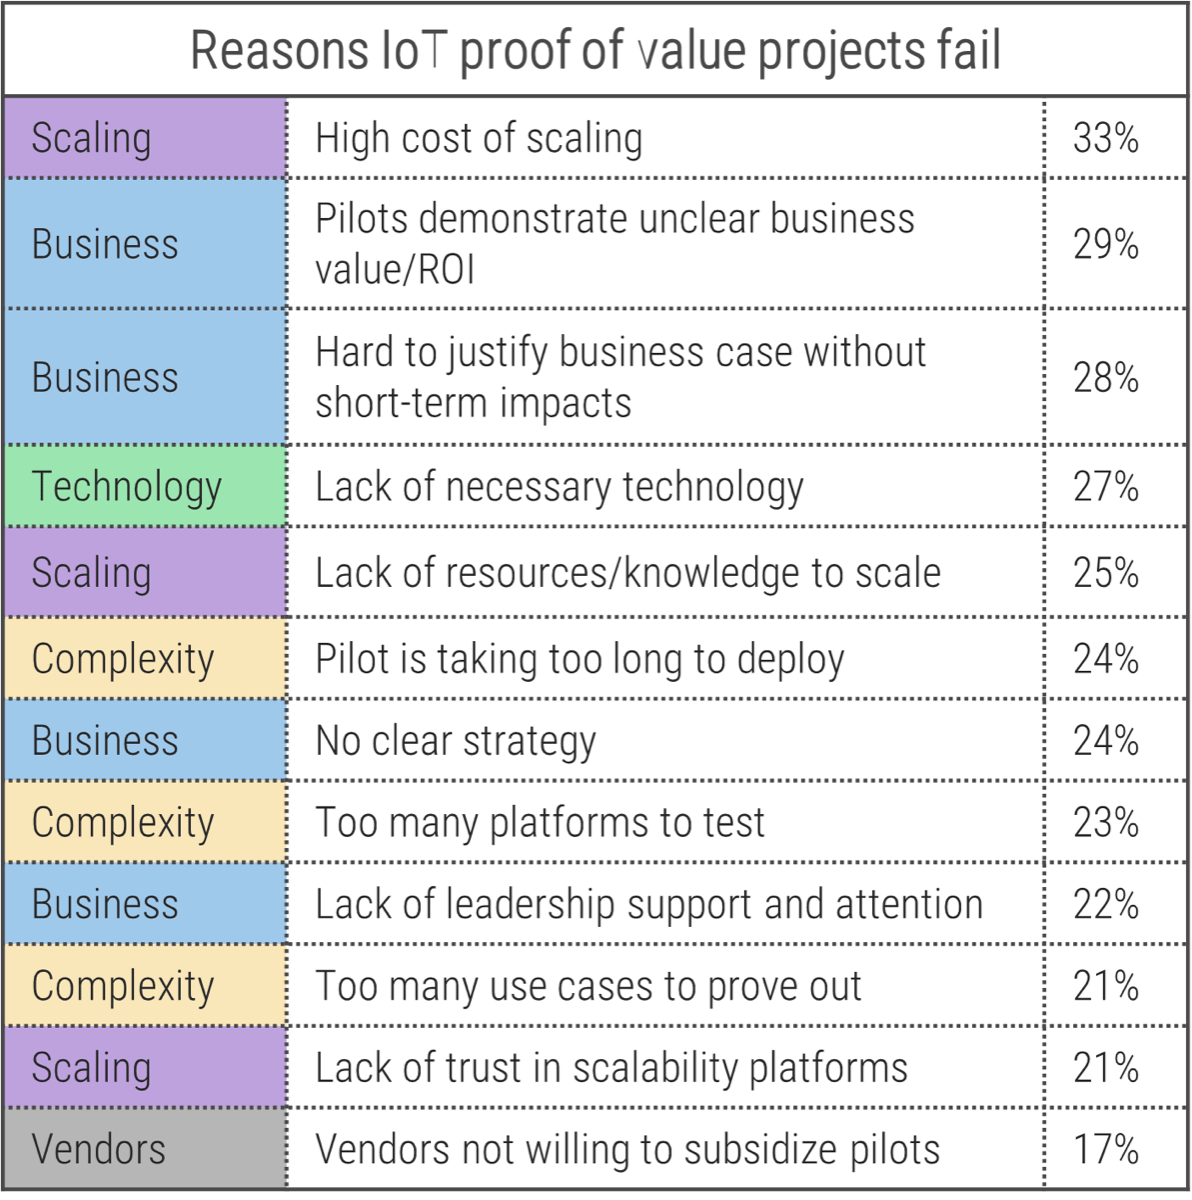 Table titled 'Reasons IoT proof of value projects fail'. There is a column for type of project (ie Scaling, Business, etc), one for reasons, and one for percentages.